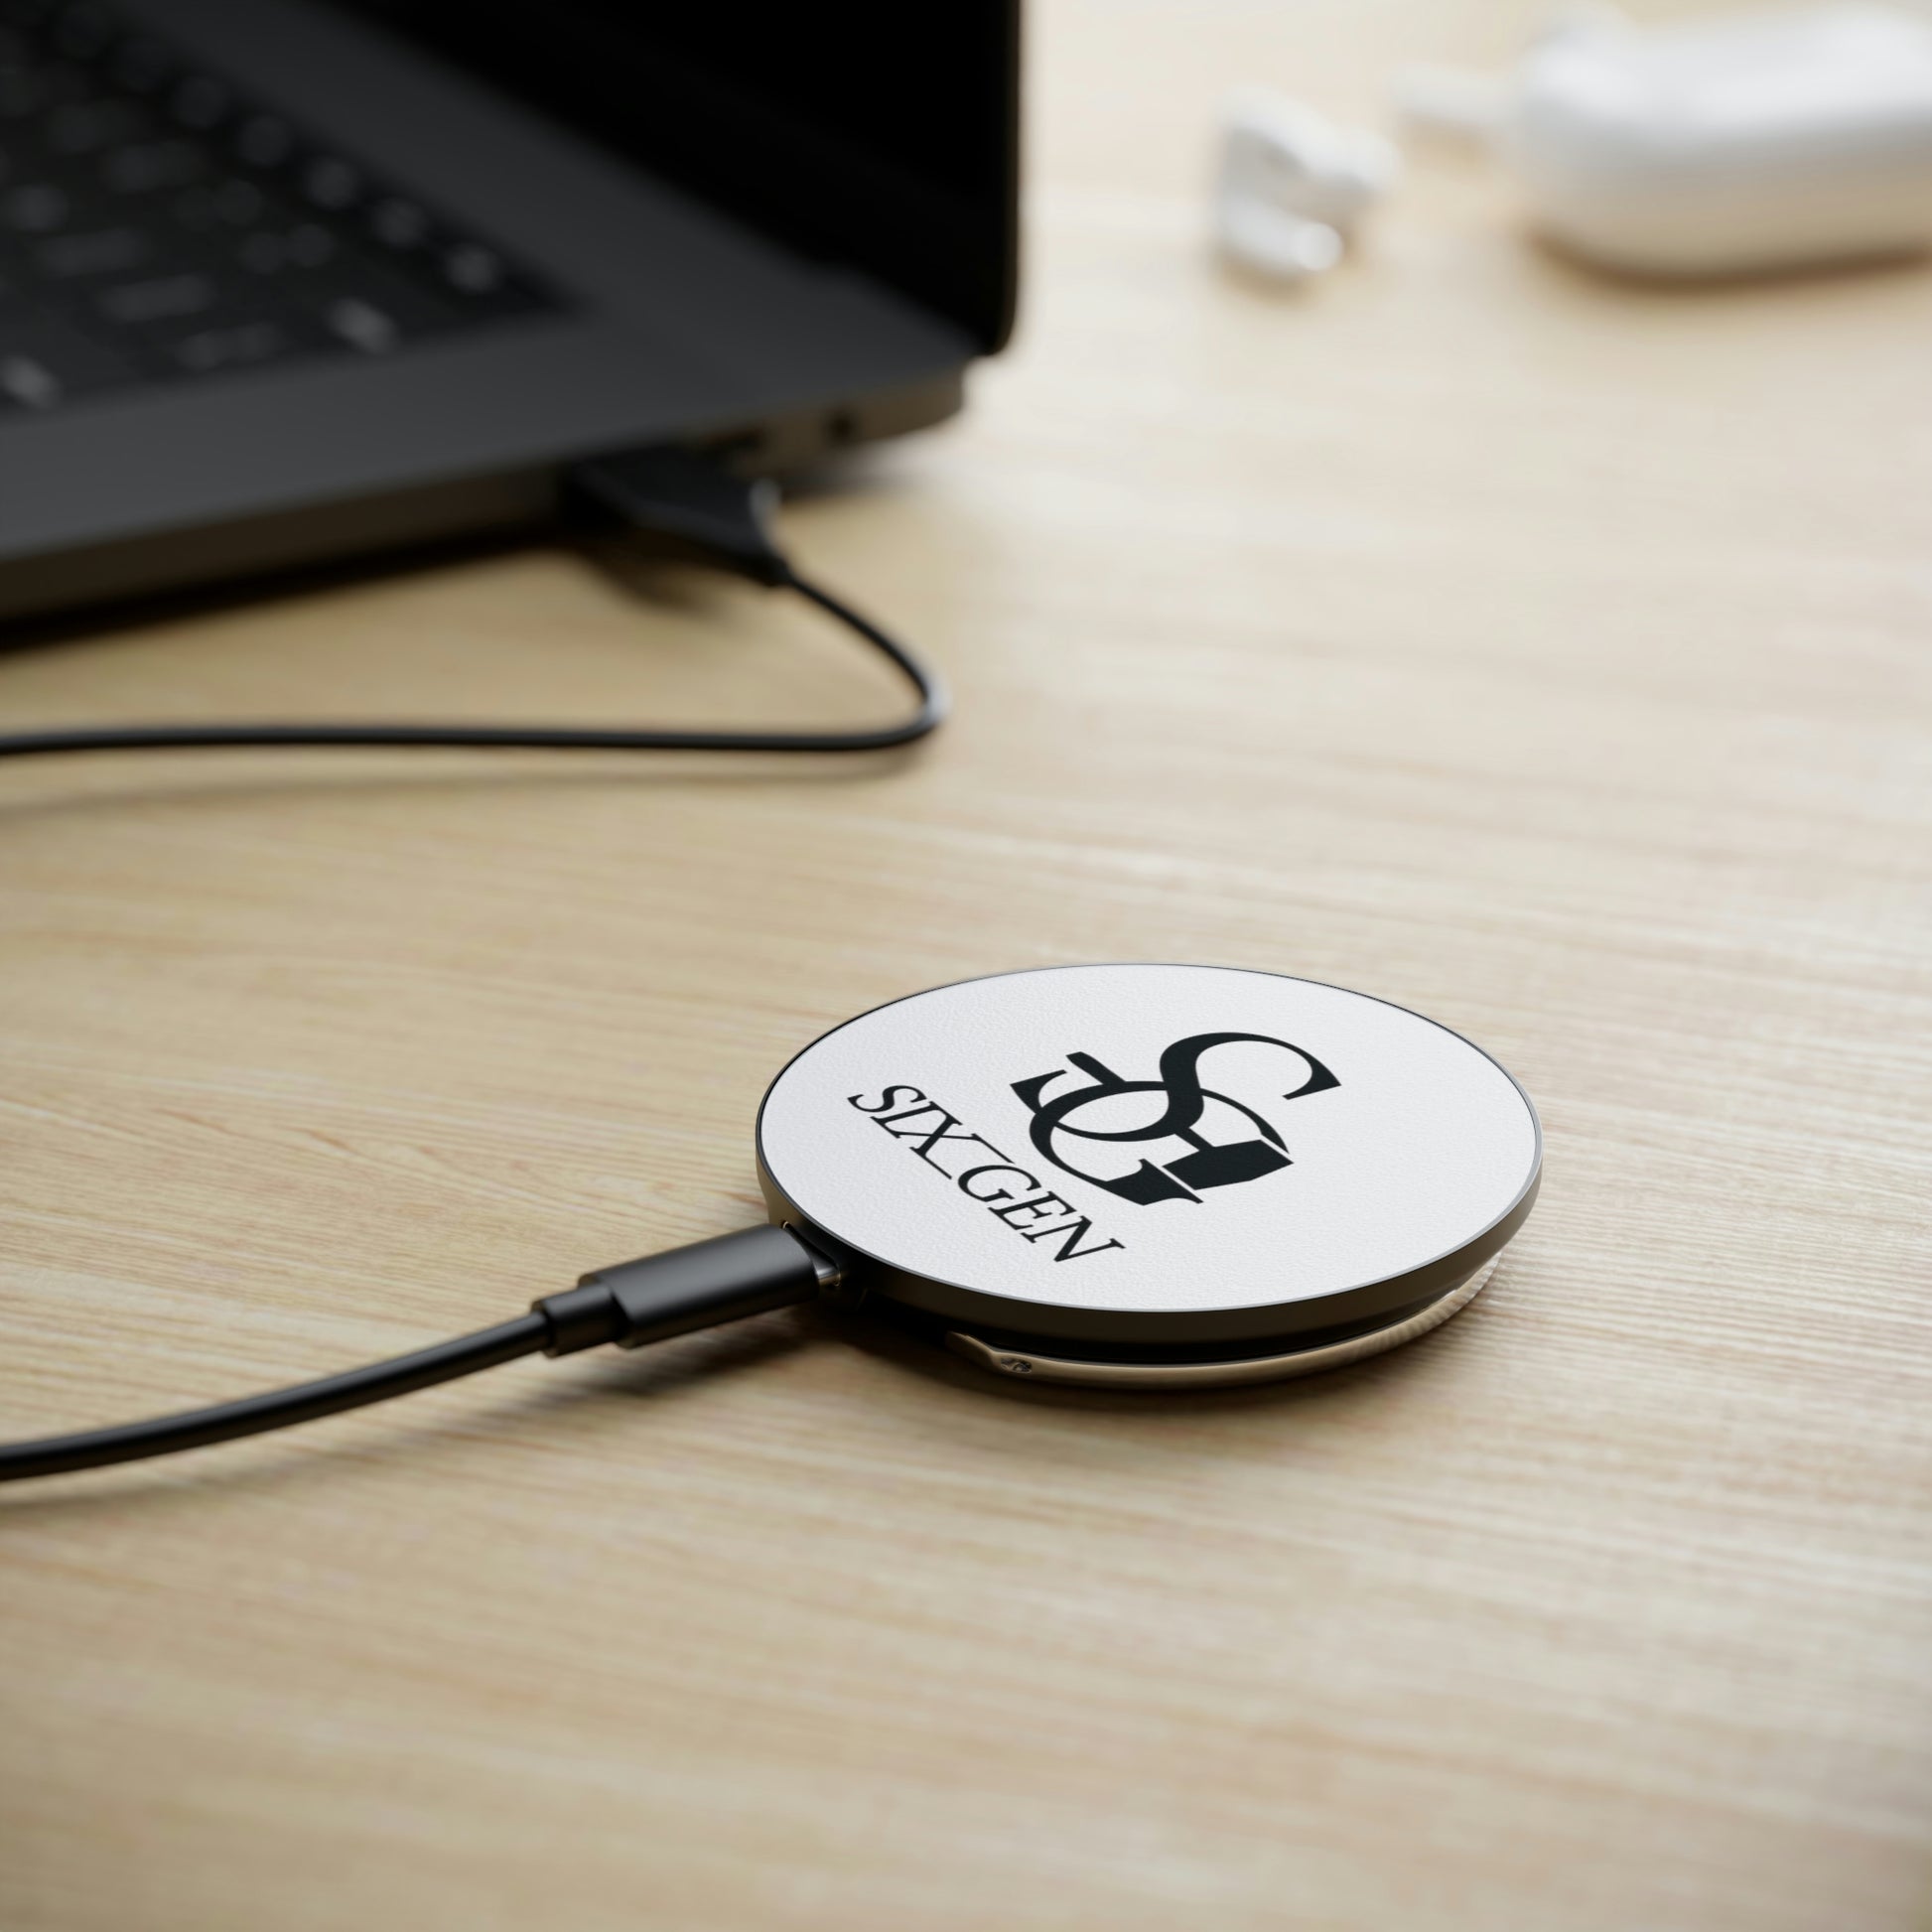 Six-Gen logo magnetic induction charger for iPhone and Samsung